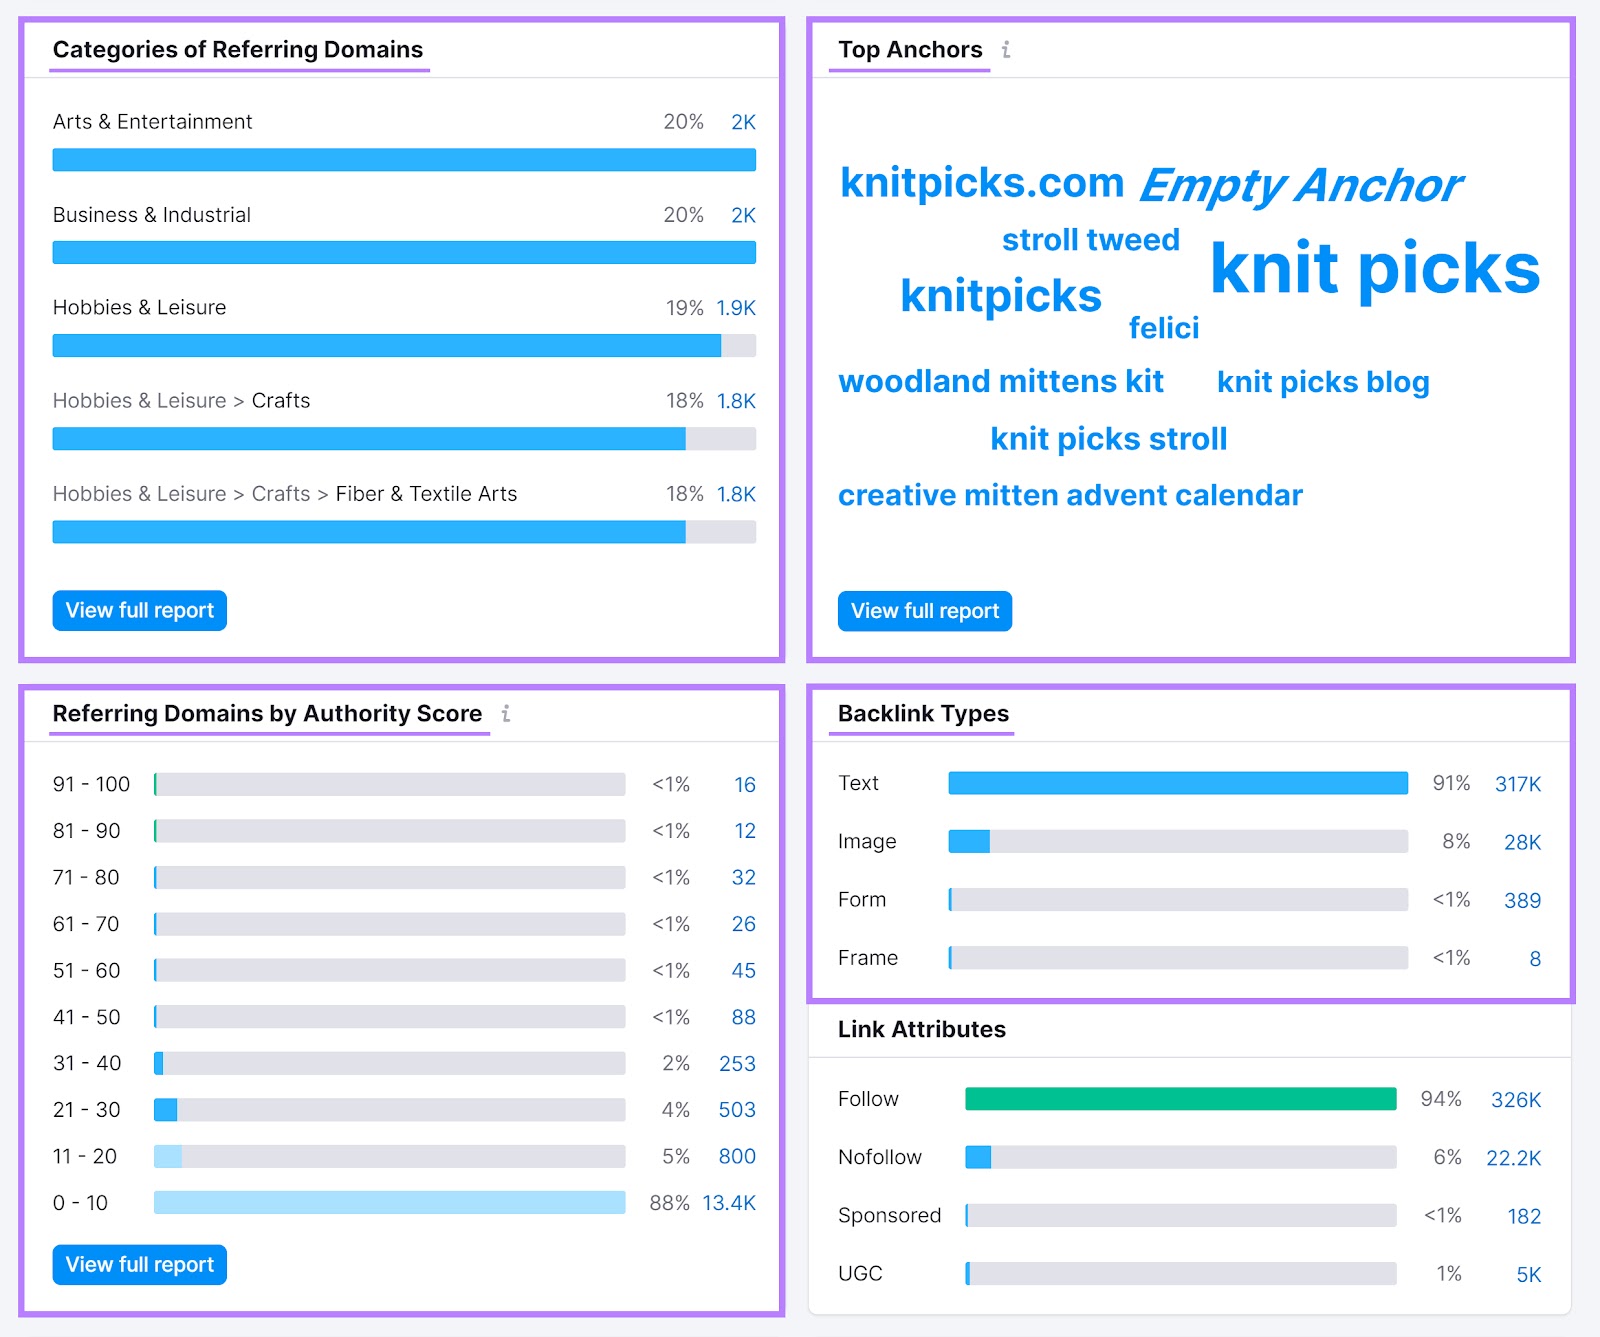 Backlink Analytics tool showing the top anchors, backlink types, and referring domains sections.